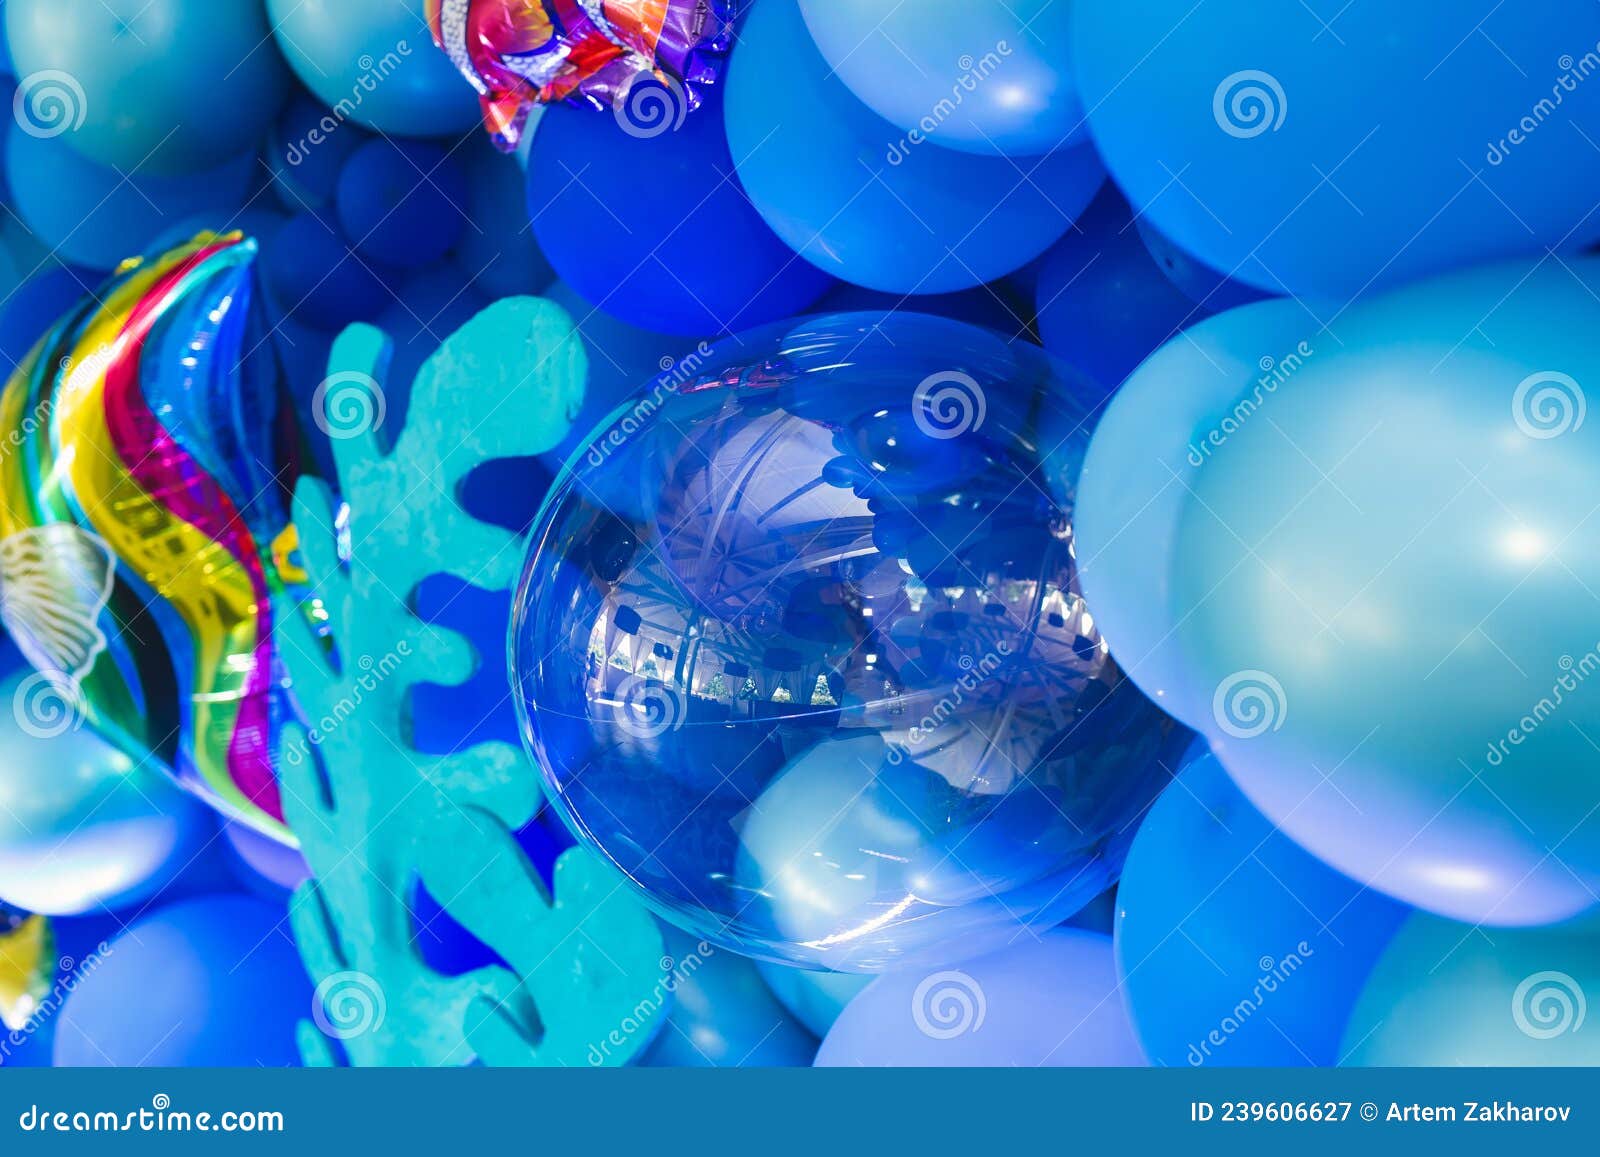 Marine-style Decor of Balloons, Fish, and Corals for the Birthday